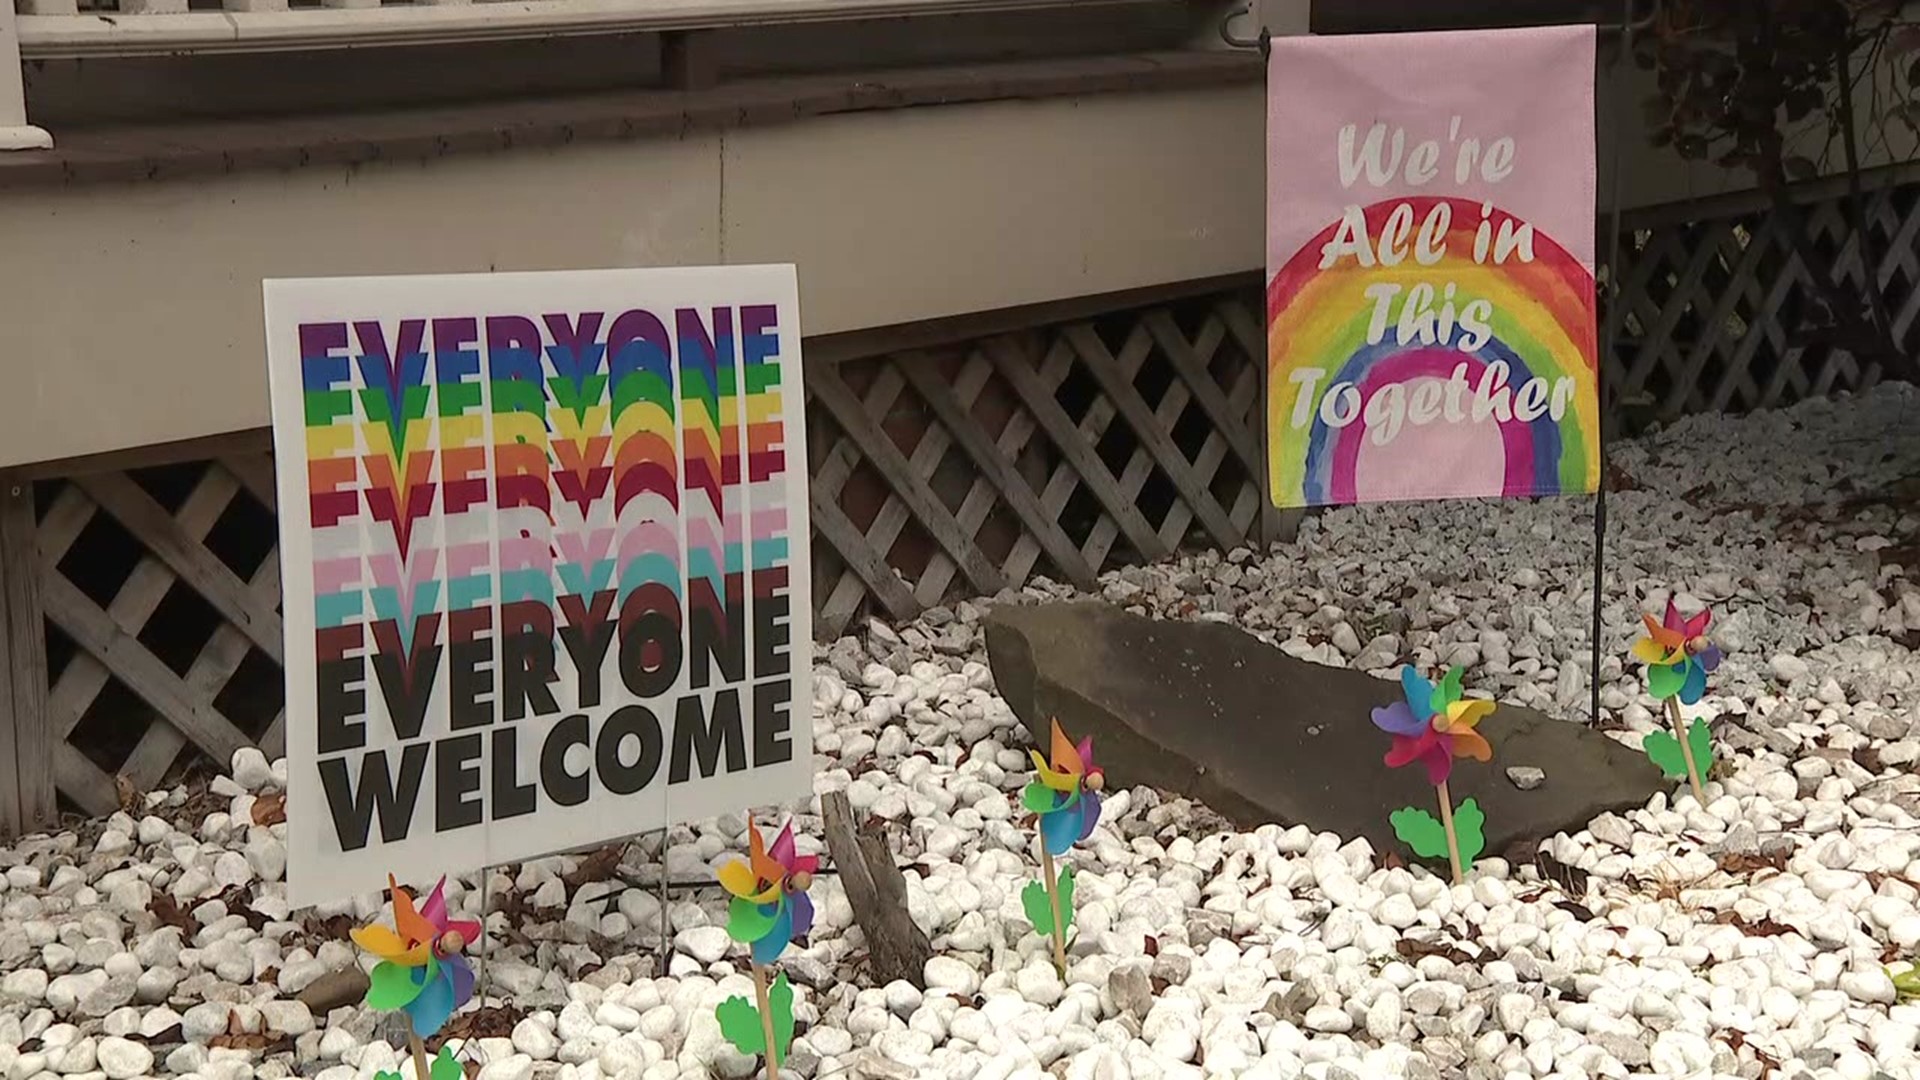 A newly formed organization in central Pennsylvania strives to advocate and educate people about the LGBTQ+ community in light of Pride Month.